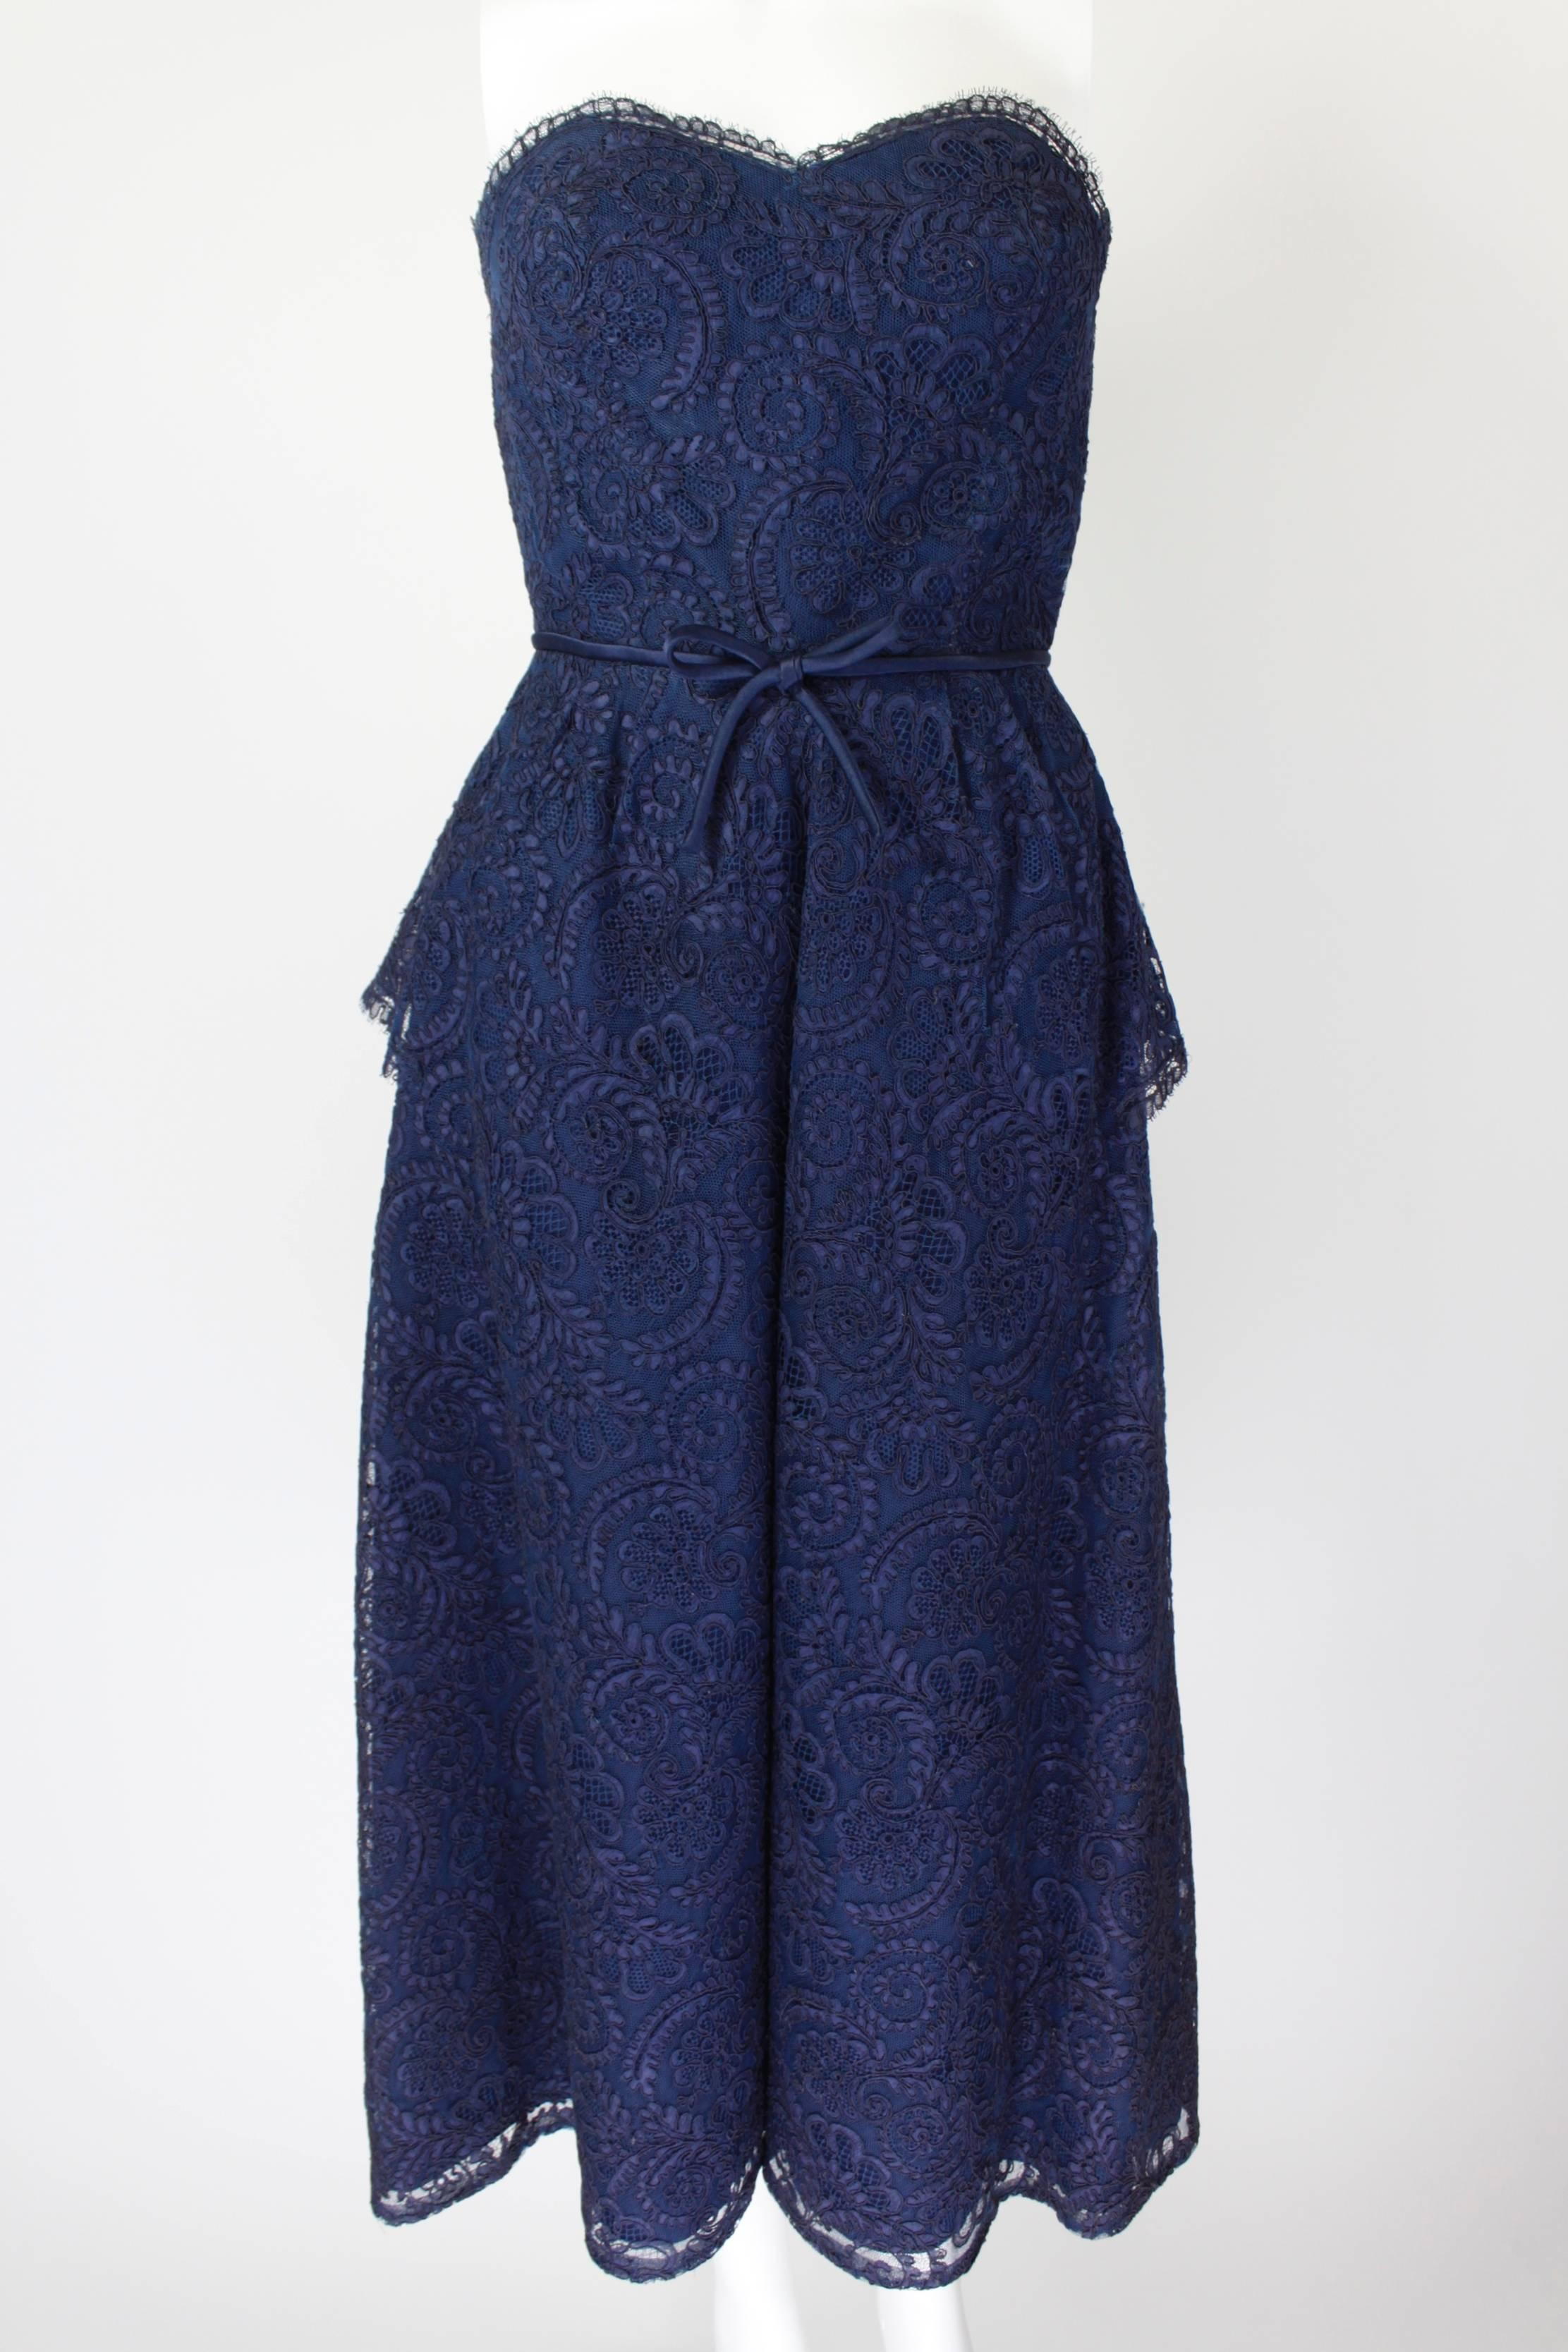 1950s Jean Desses Haute Couture Navy Guipure Lace Cocktail Dress In Excellent Condition For Sale In Los Angeles, CA